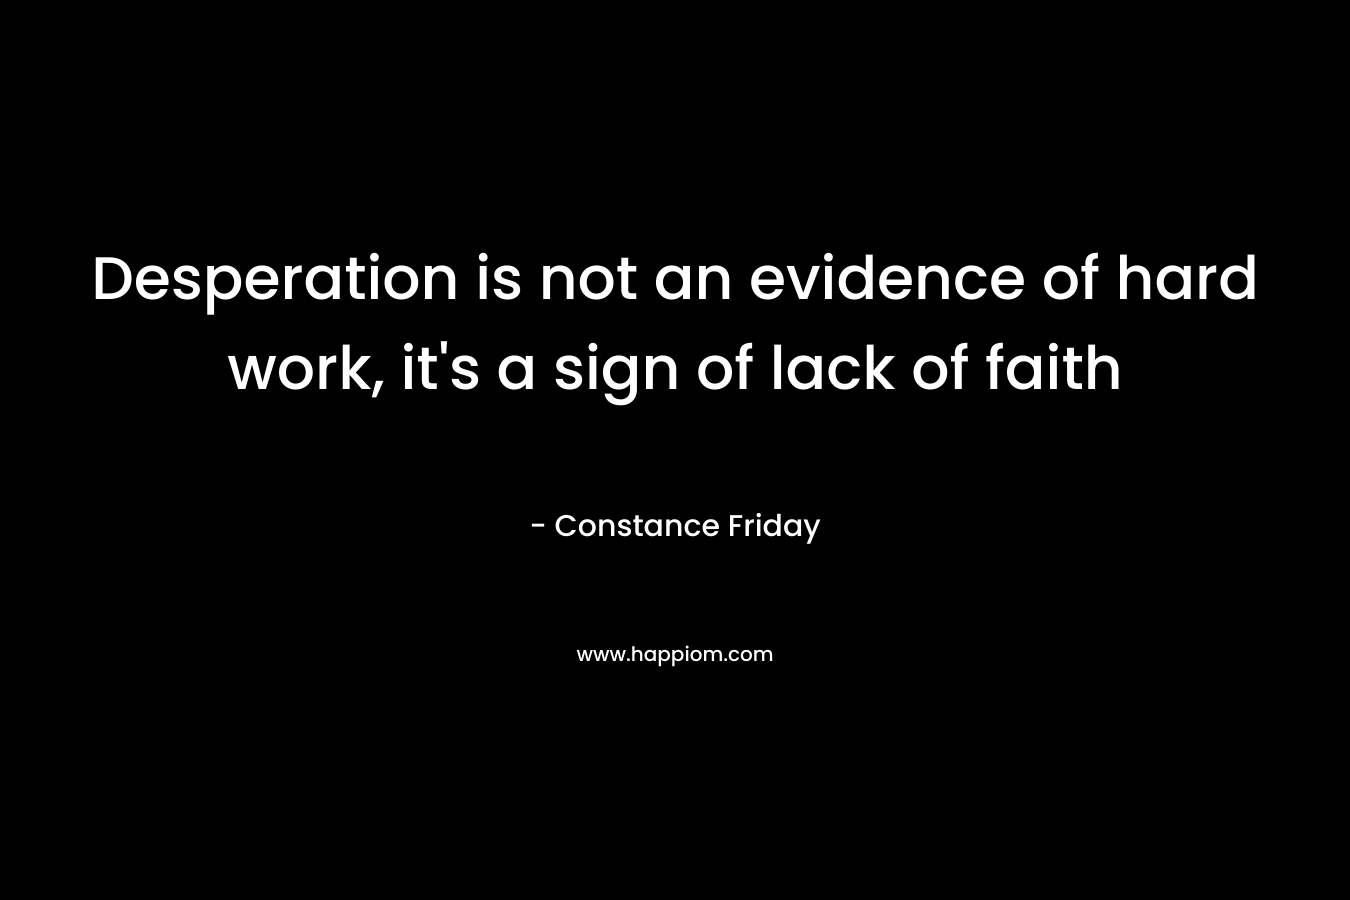 Desperation is not an evidence of hard work, it's a sign of lack of faith